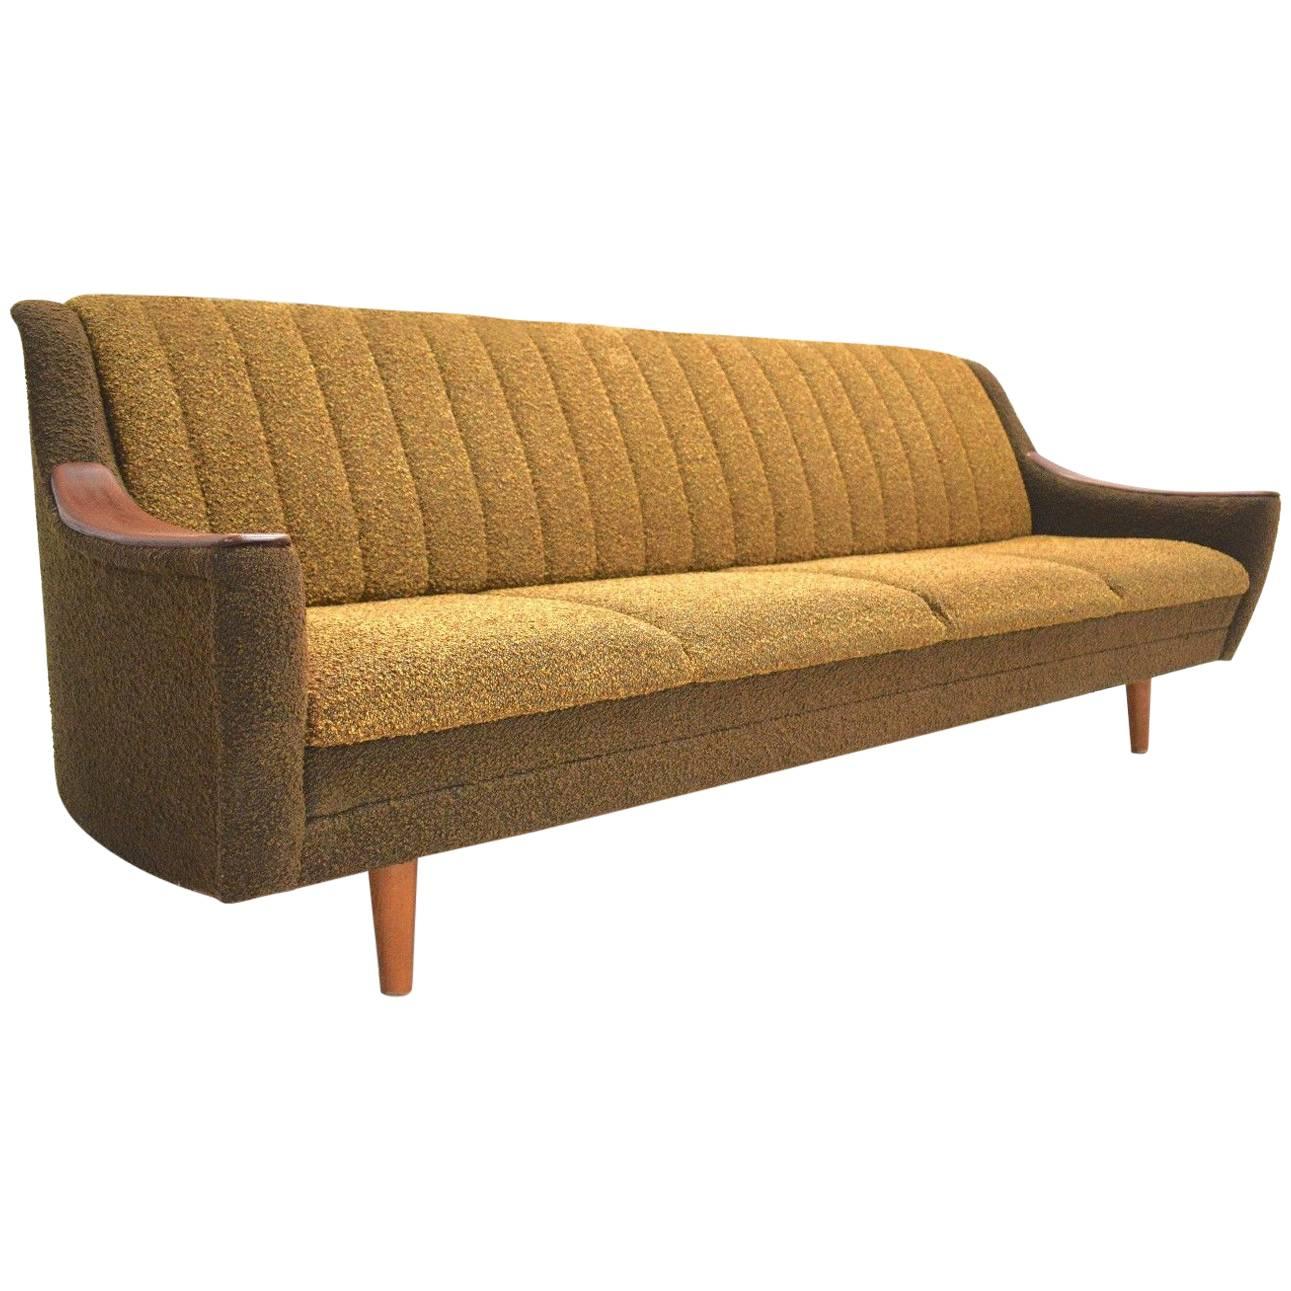 Norwegian Yellow and Brown Wool Four-Seat Teak Sofabed, Midcentury, 1960s